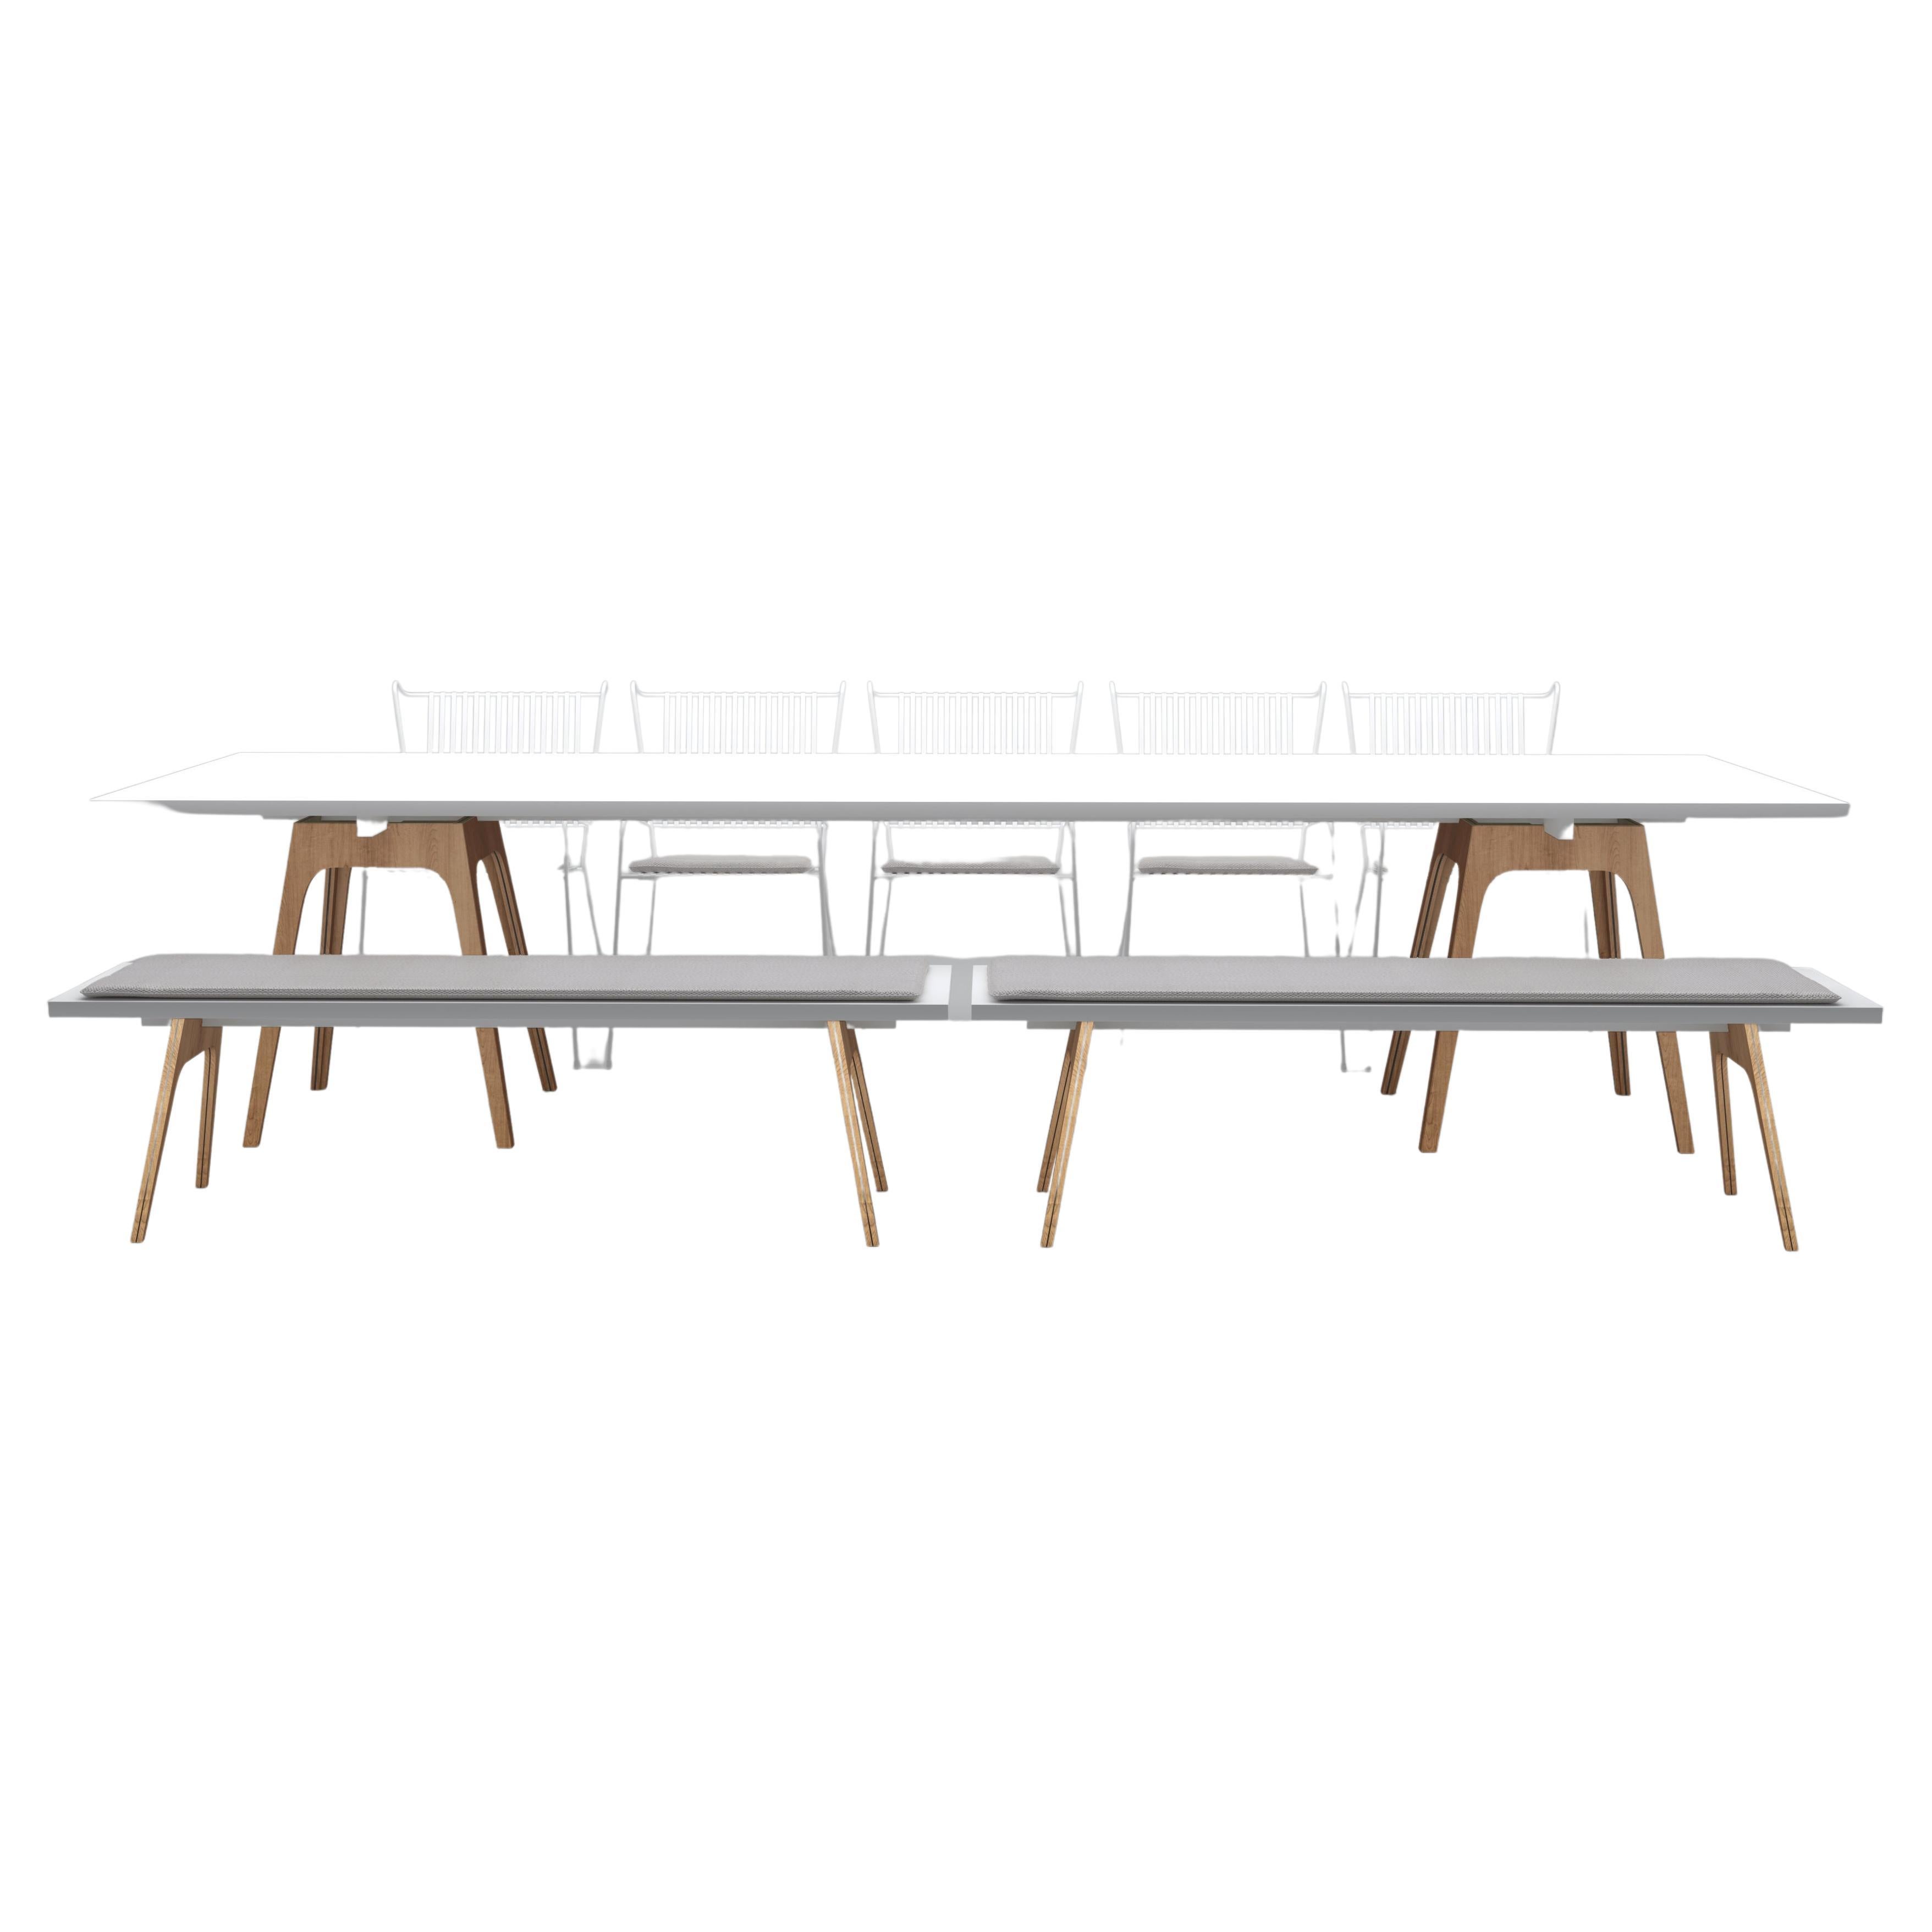 Set of 8 Marina White Dining Table, Benches and Capri Chairs by Cools Collection